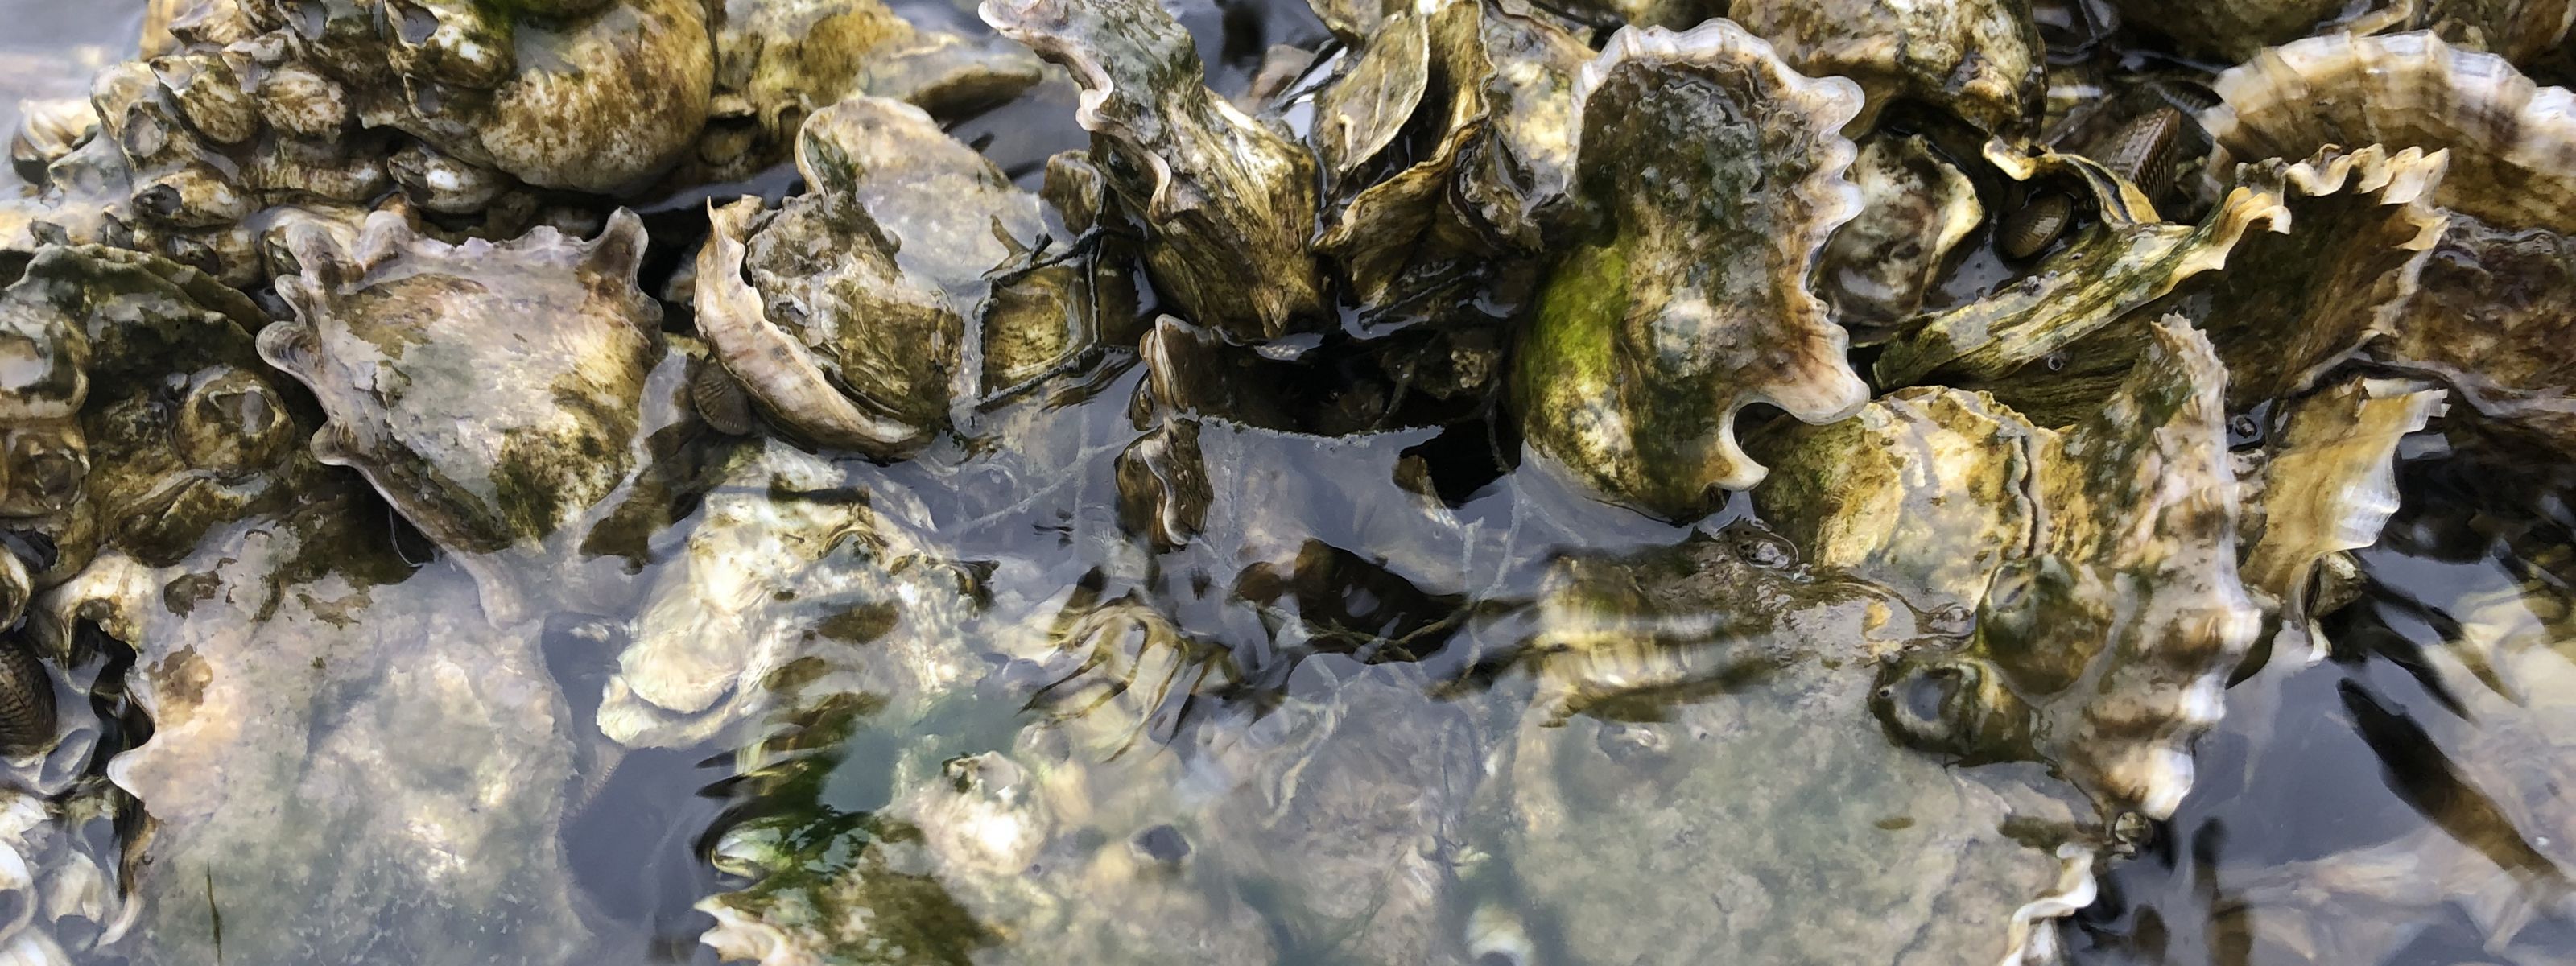 Closeup of shallowly submerged oysters..